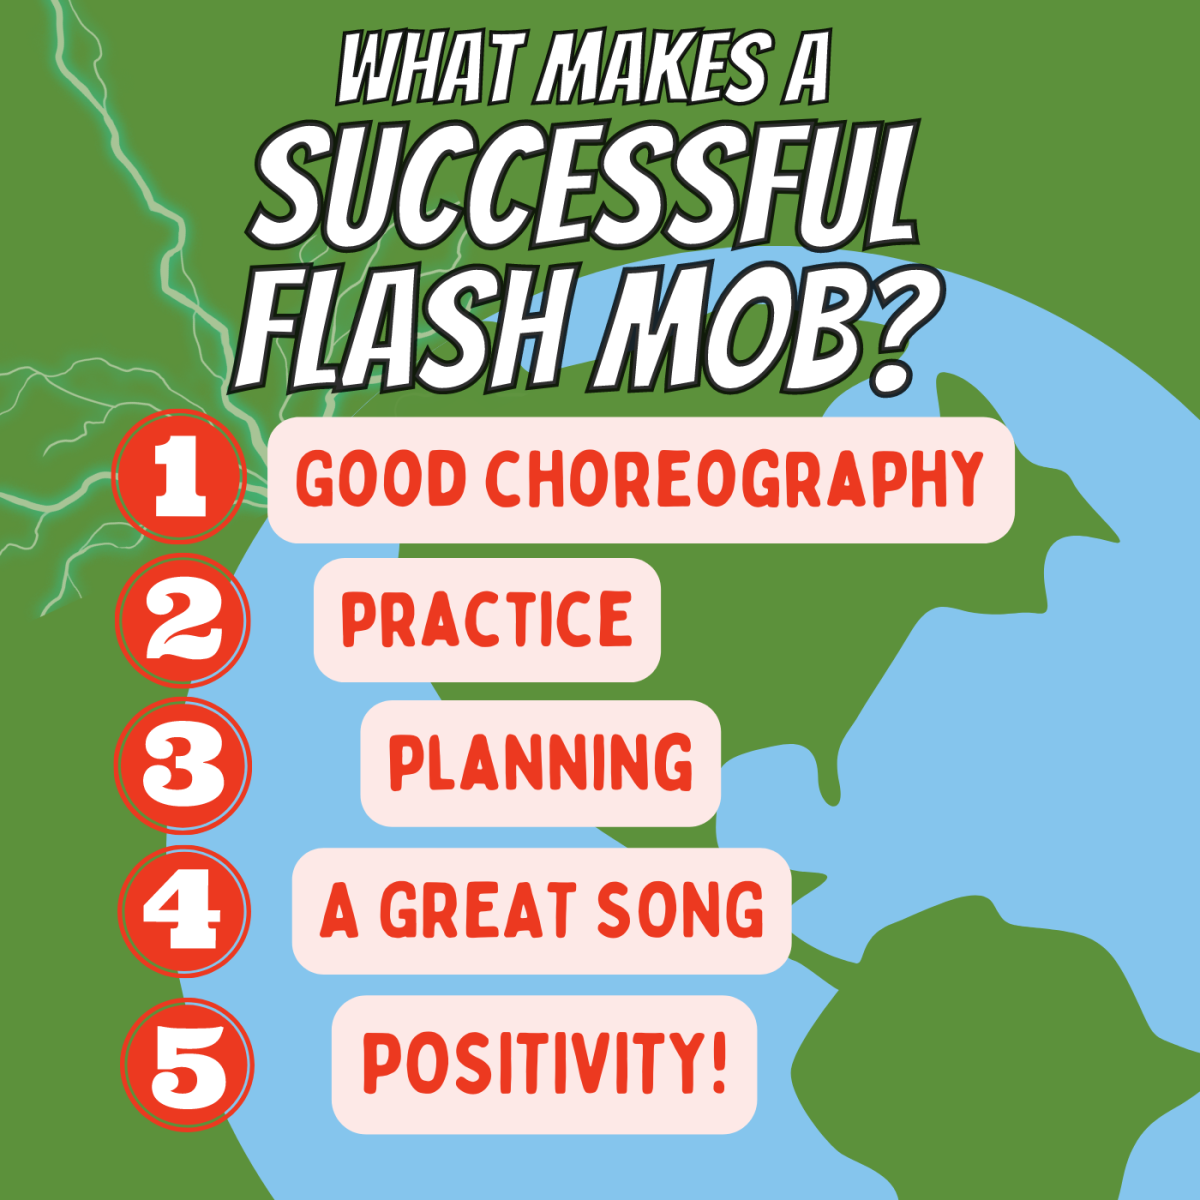 Knowing in advance what goes into a successful flash mob performance will make everything go smoother.